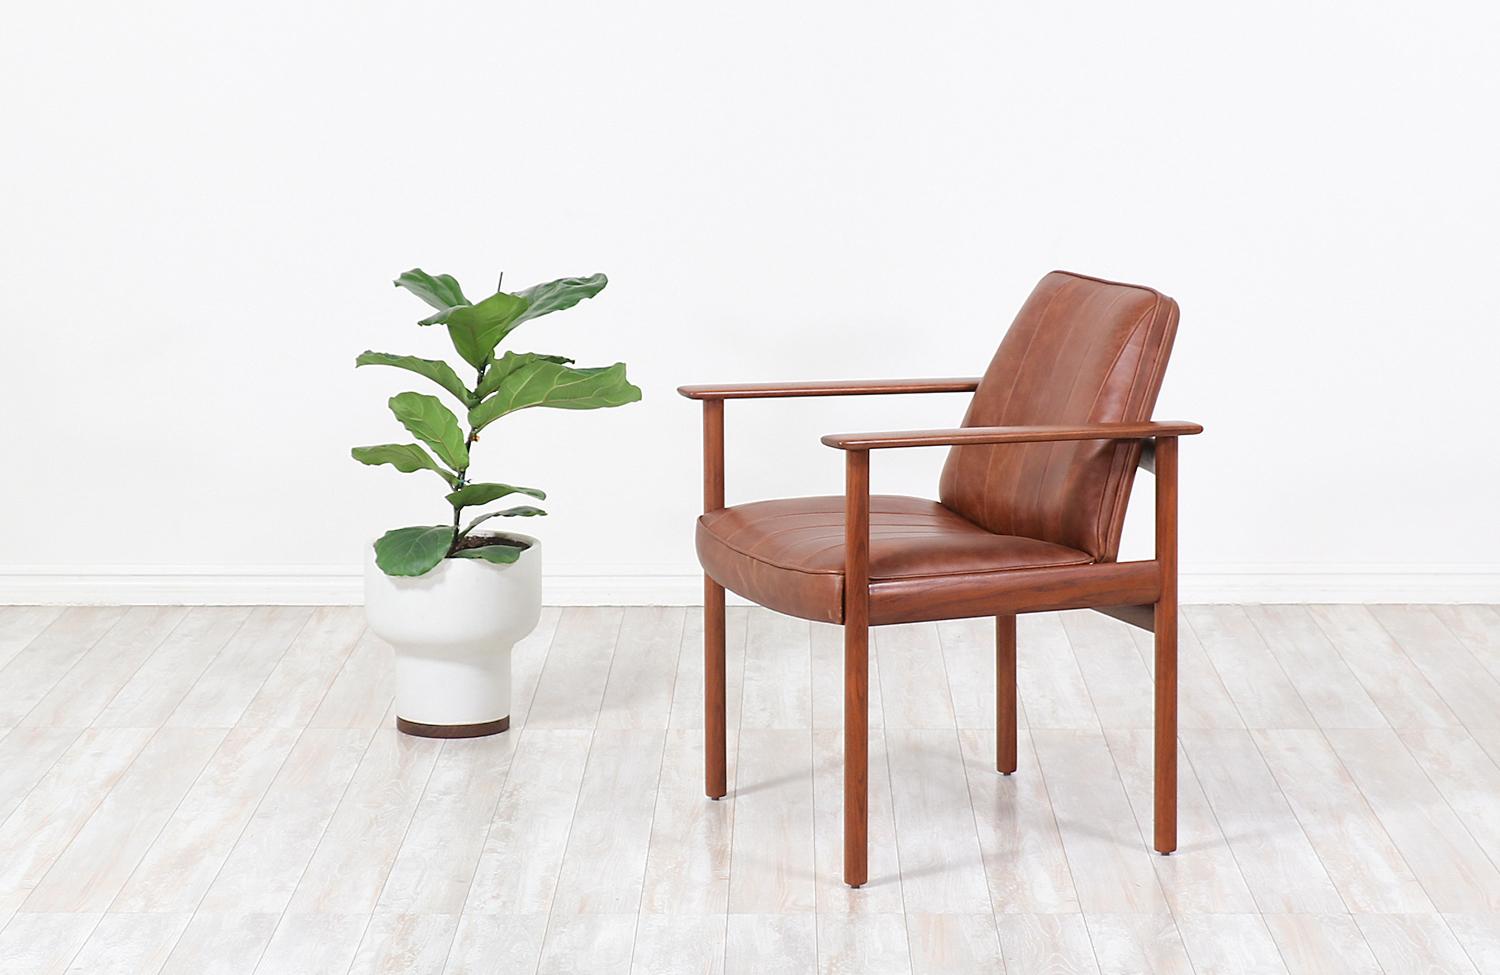 Cozy modern armchair designed by Sven Ivar Dysthe for Dokka Møbler in Norway, circa 1960s. This elegant Model-496 armchair design features a solid walnut wood frame that supports the newly upholstered seat in brown full-grain leather, making it a